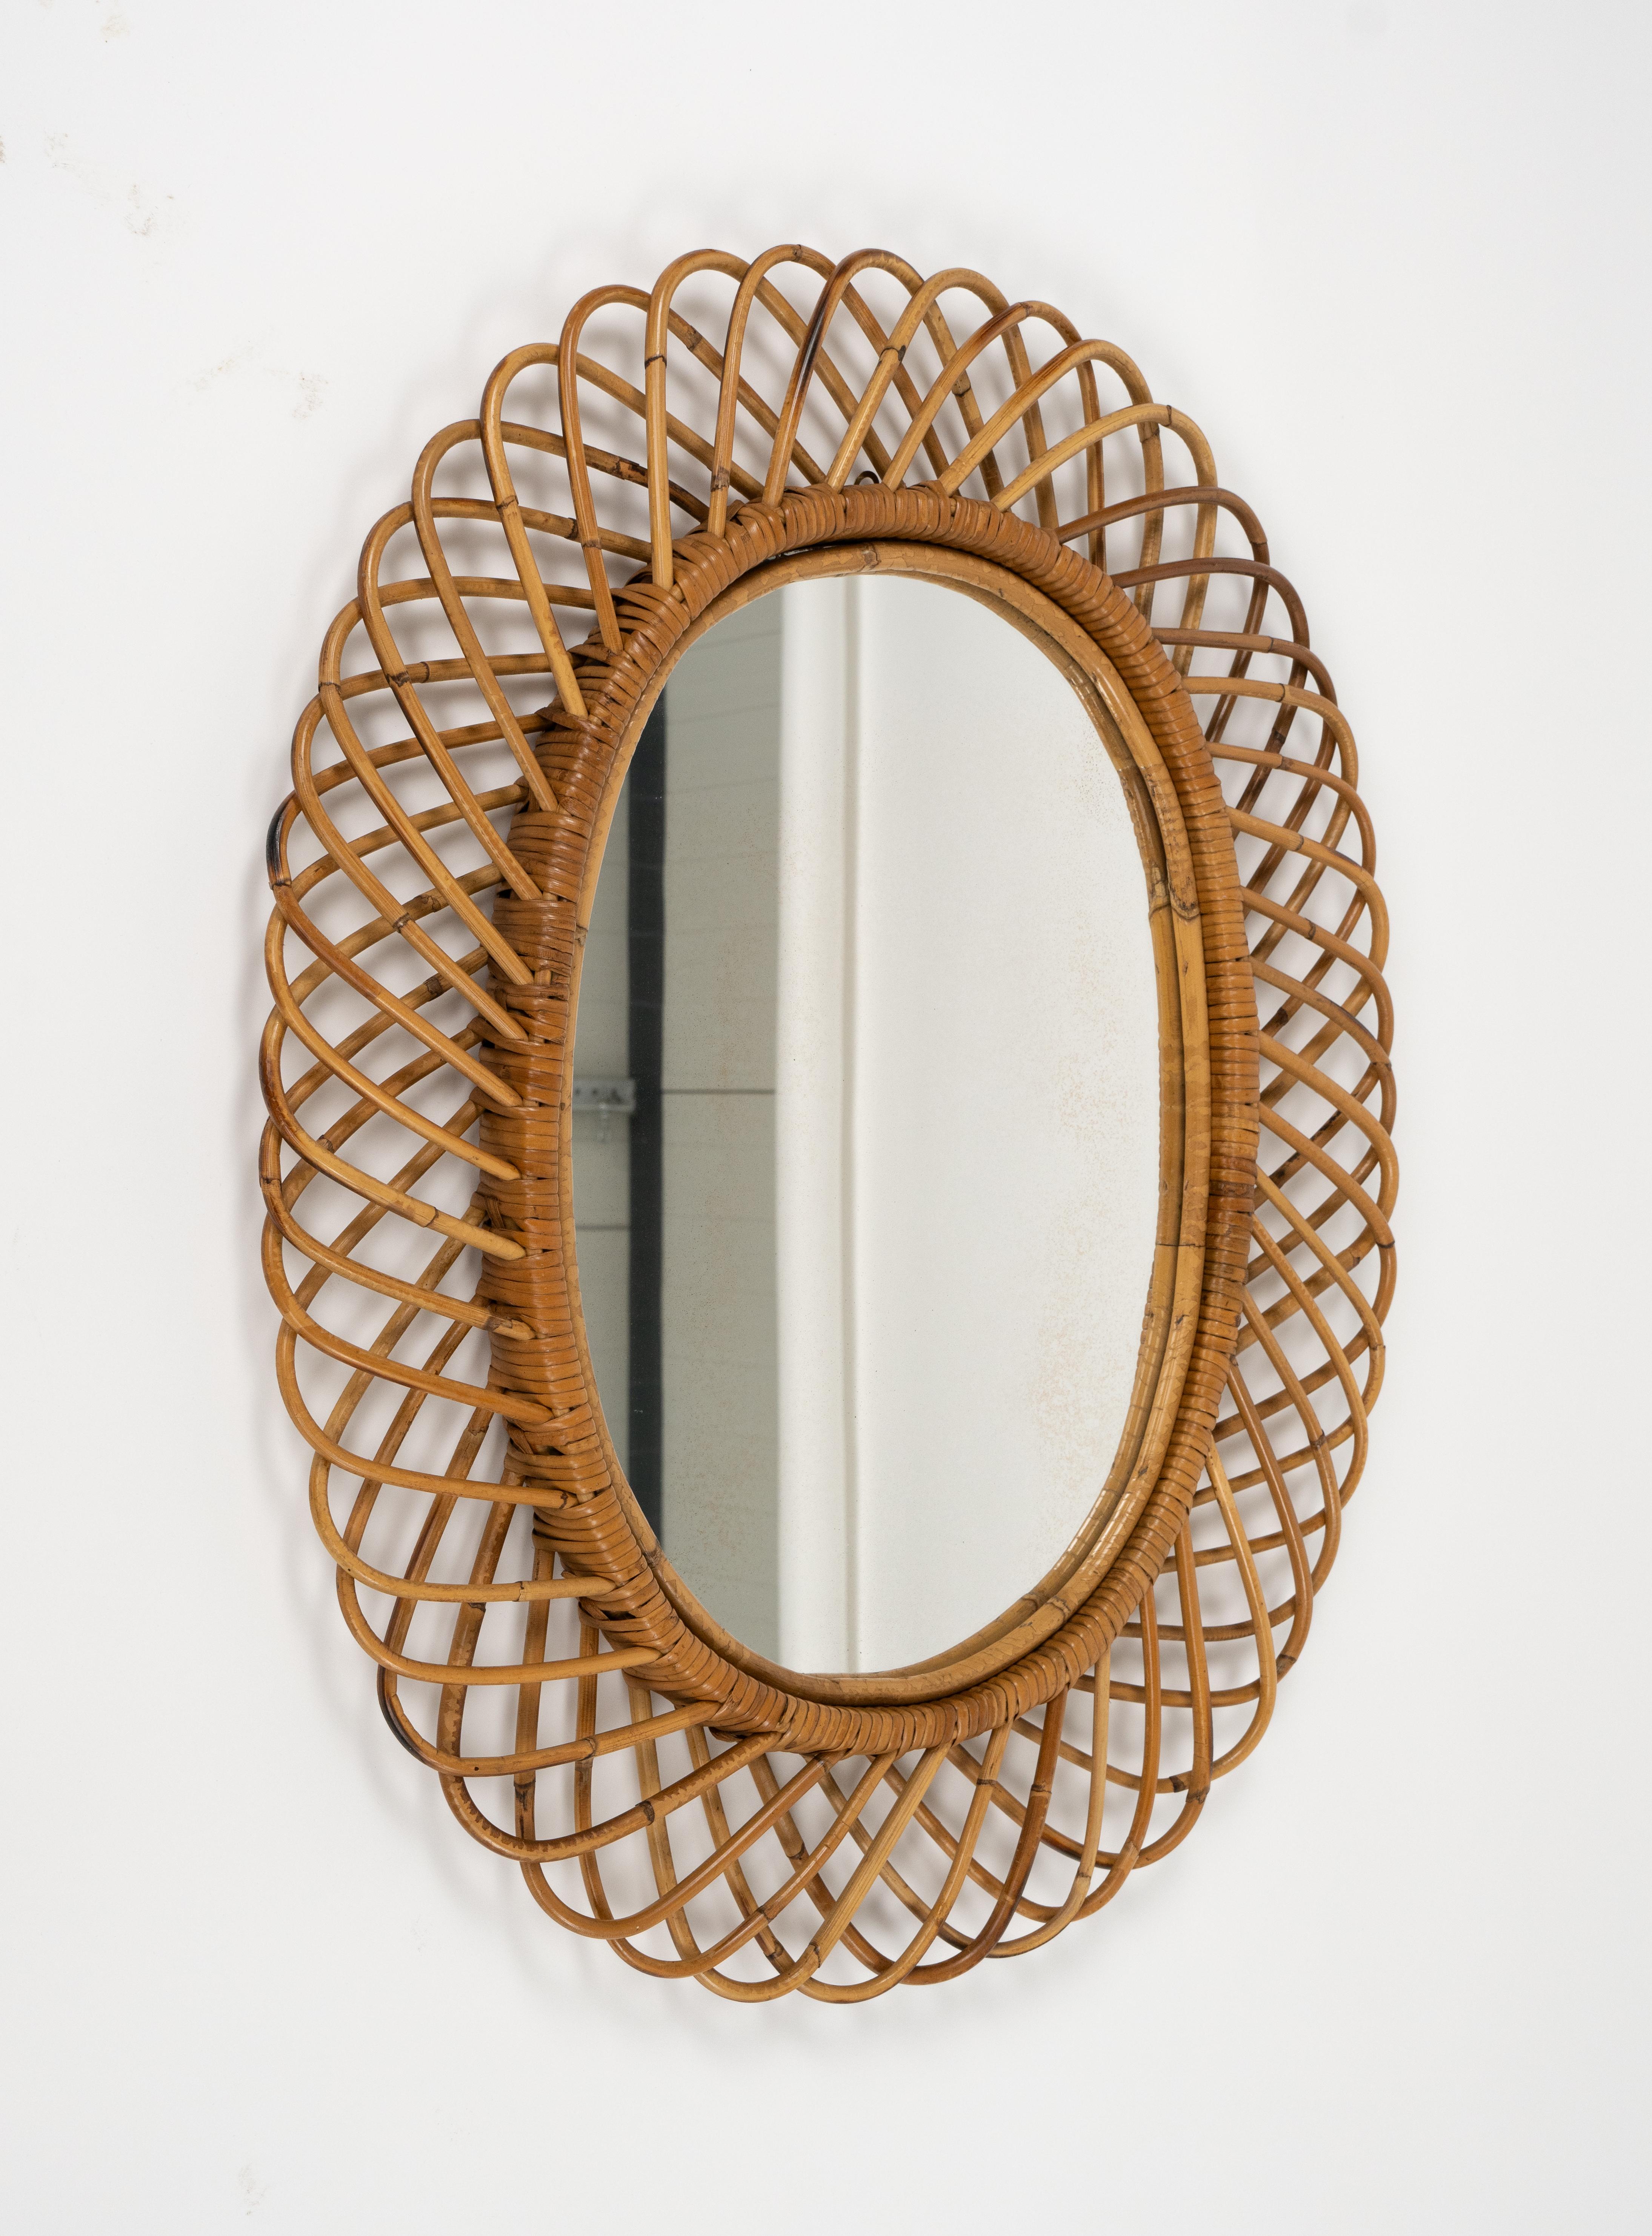 Midcentury Rattan and Bamboo Oval Wall Mirror by Franco Albini, Italy 1960s For Sale 5